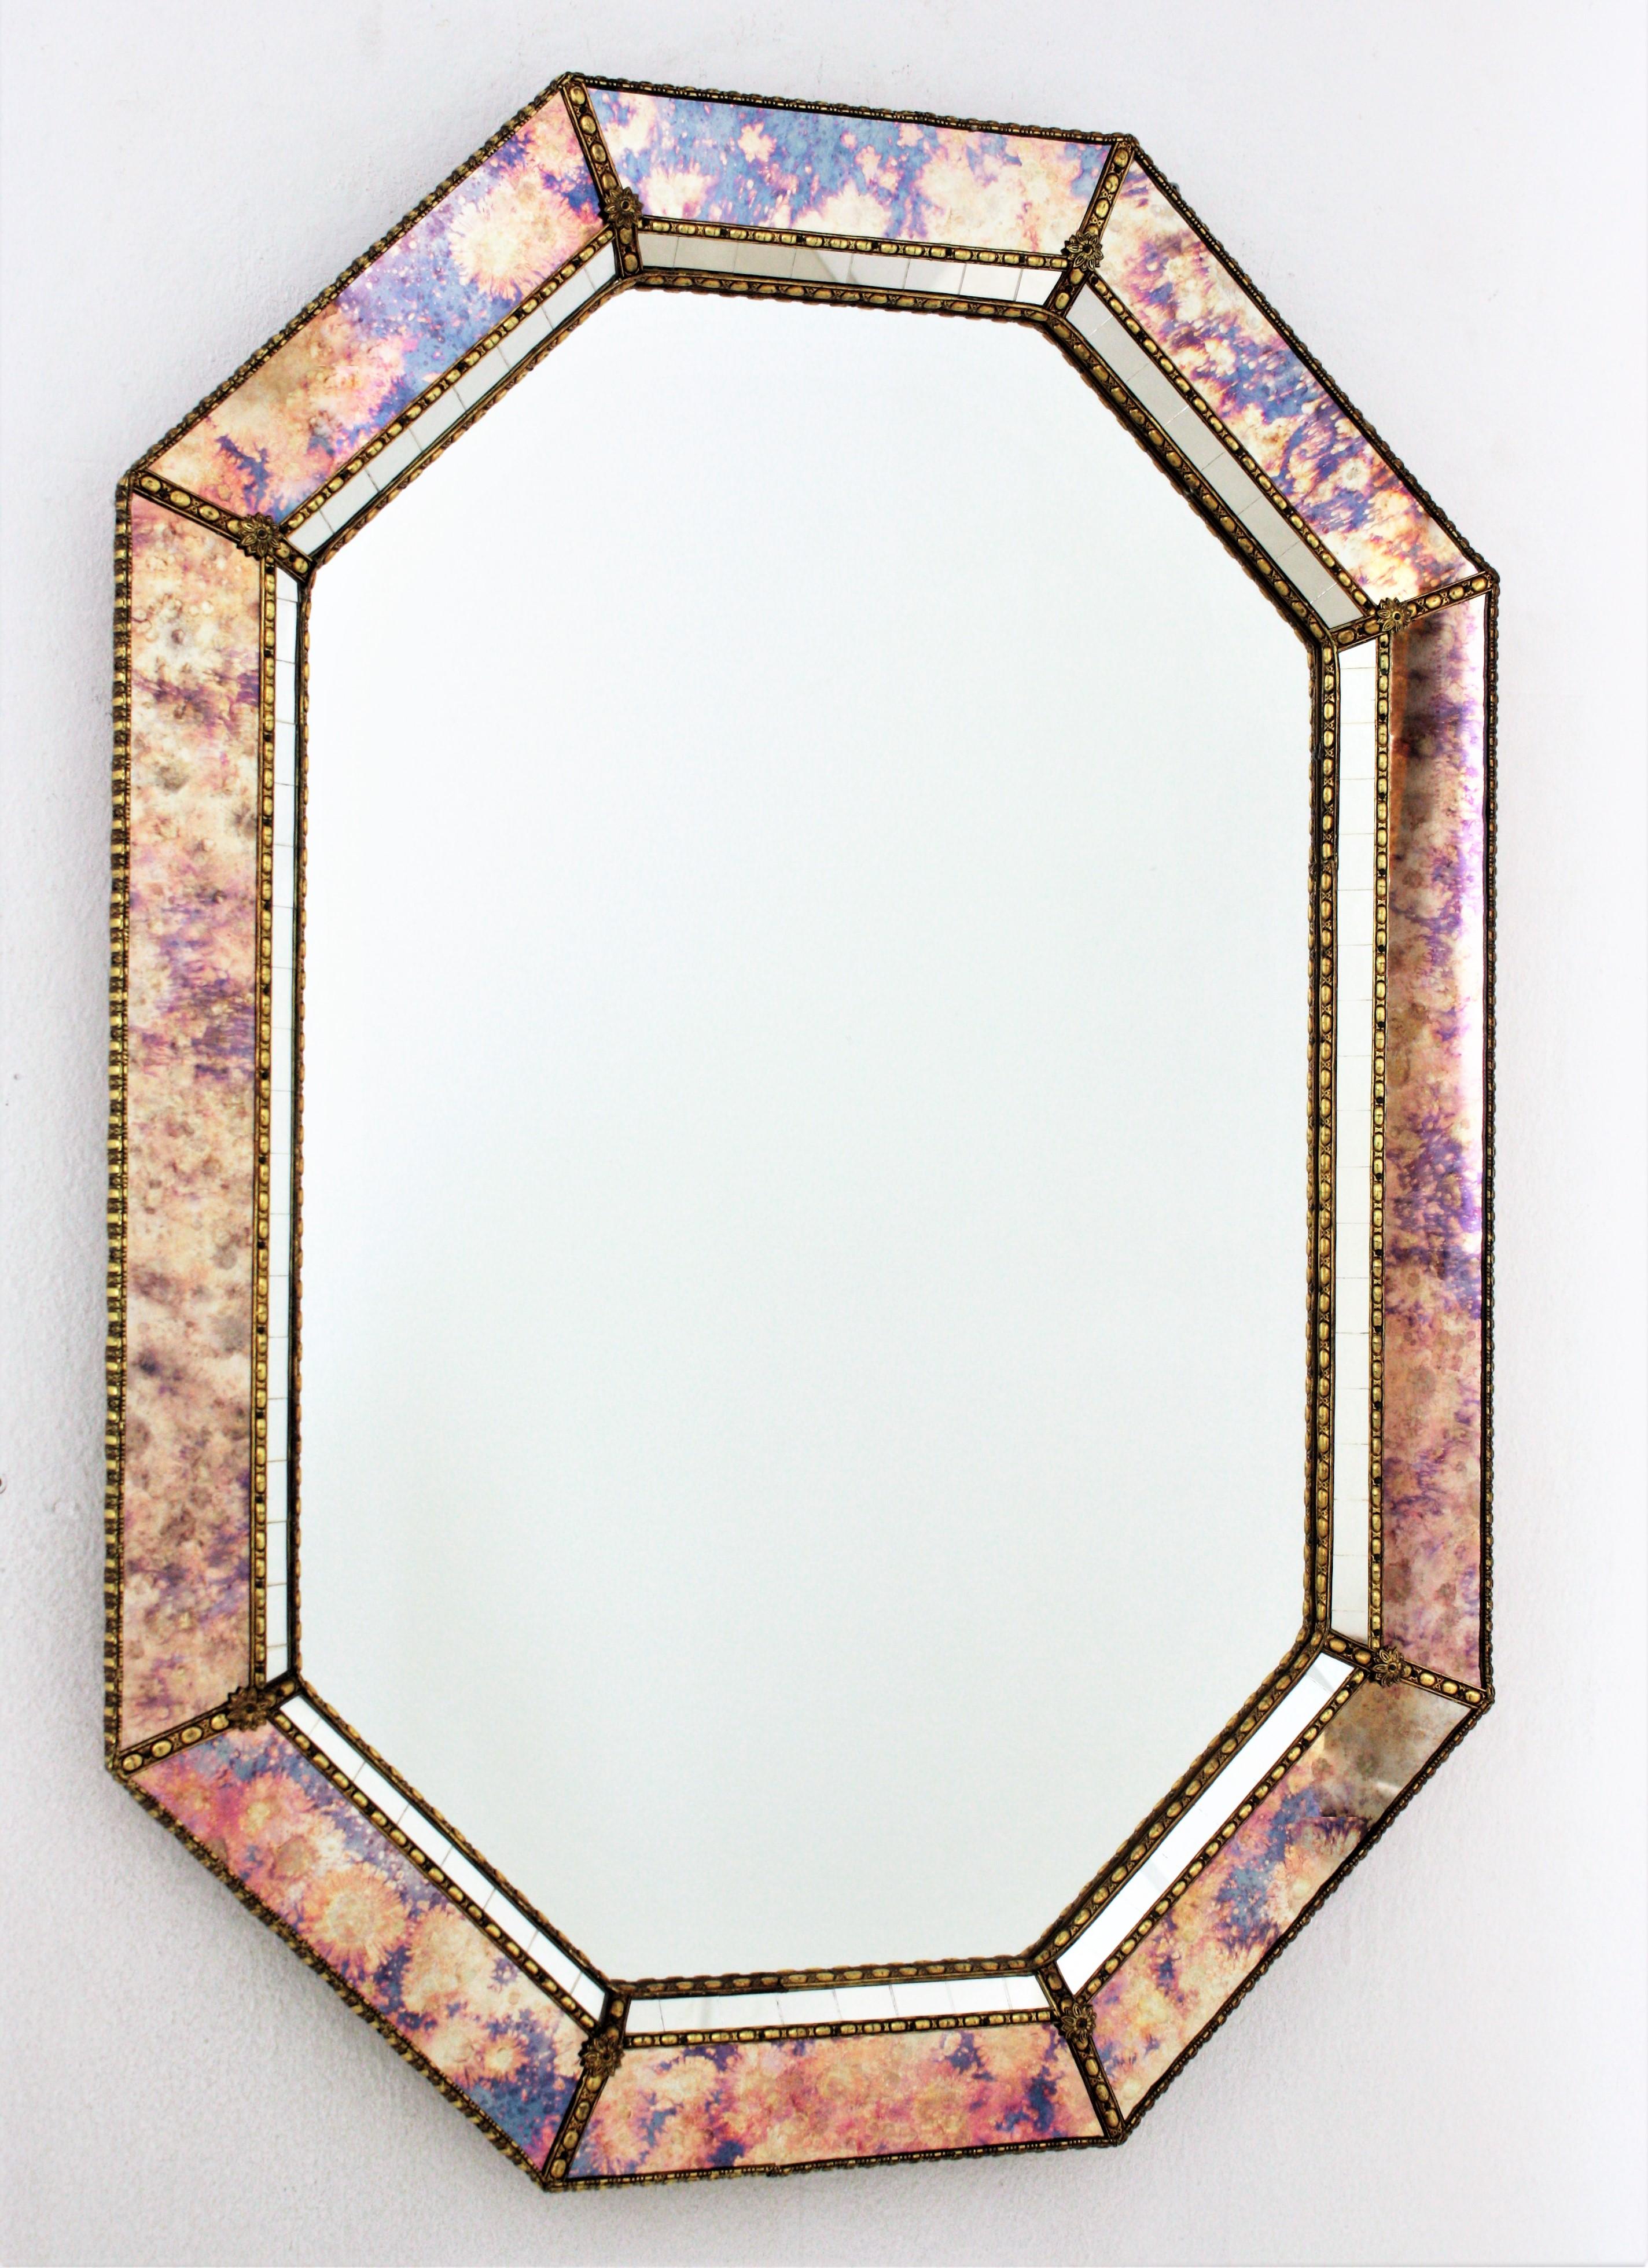 Cool Venetian style Hollywood Regency octagonal mirror with iridiscent and mirror glass panels. Spain, 1960s
This glamorous mirror featuring a double layered mirror frame made of brass. Octagonal form with a frame that has two layers of decorative